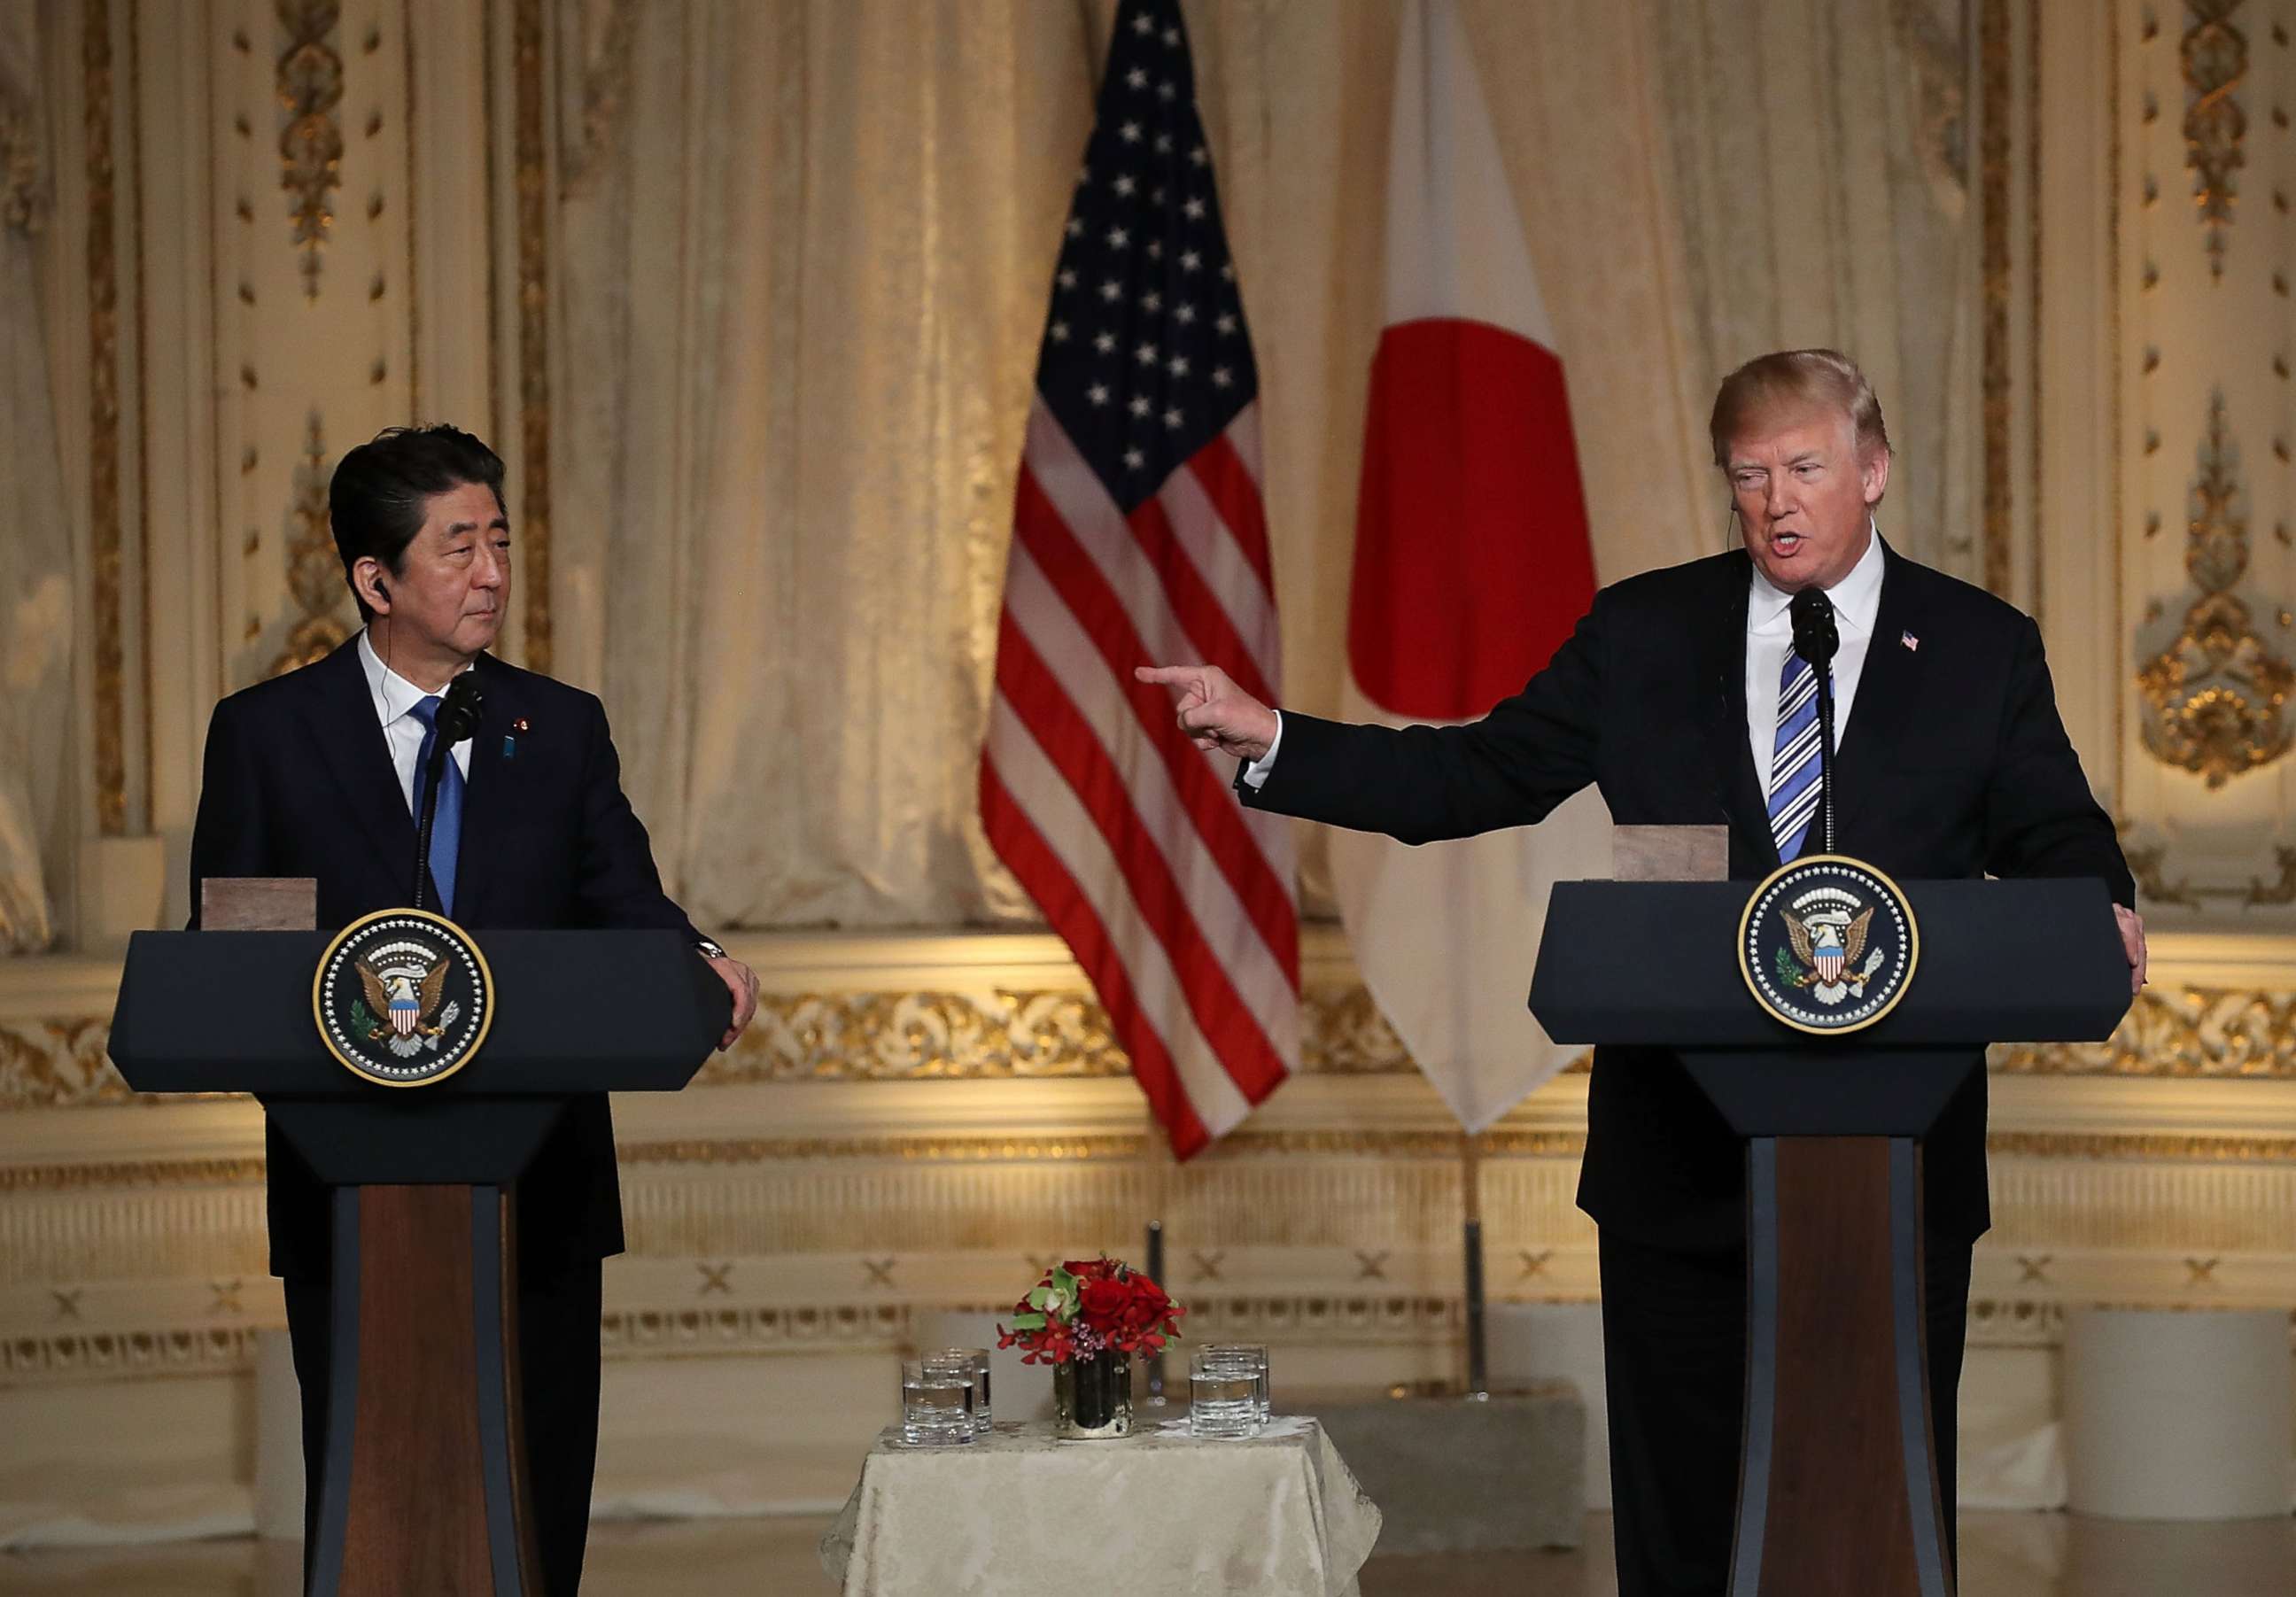 PHOTO: President Donald Trump and Japanese Prime Minister Shinzo Abe hold a news conference at Mar-a-Lago resort on April 18, 2018 in West Palm Beach, Fla.